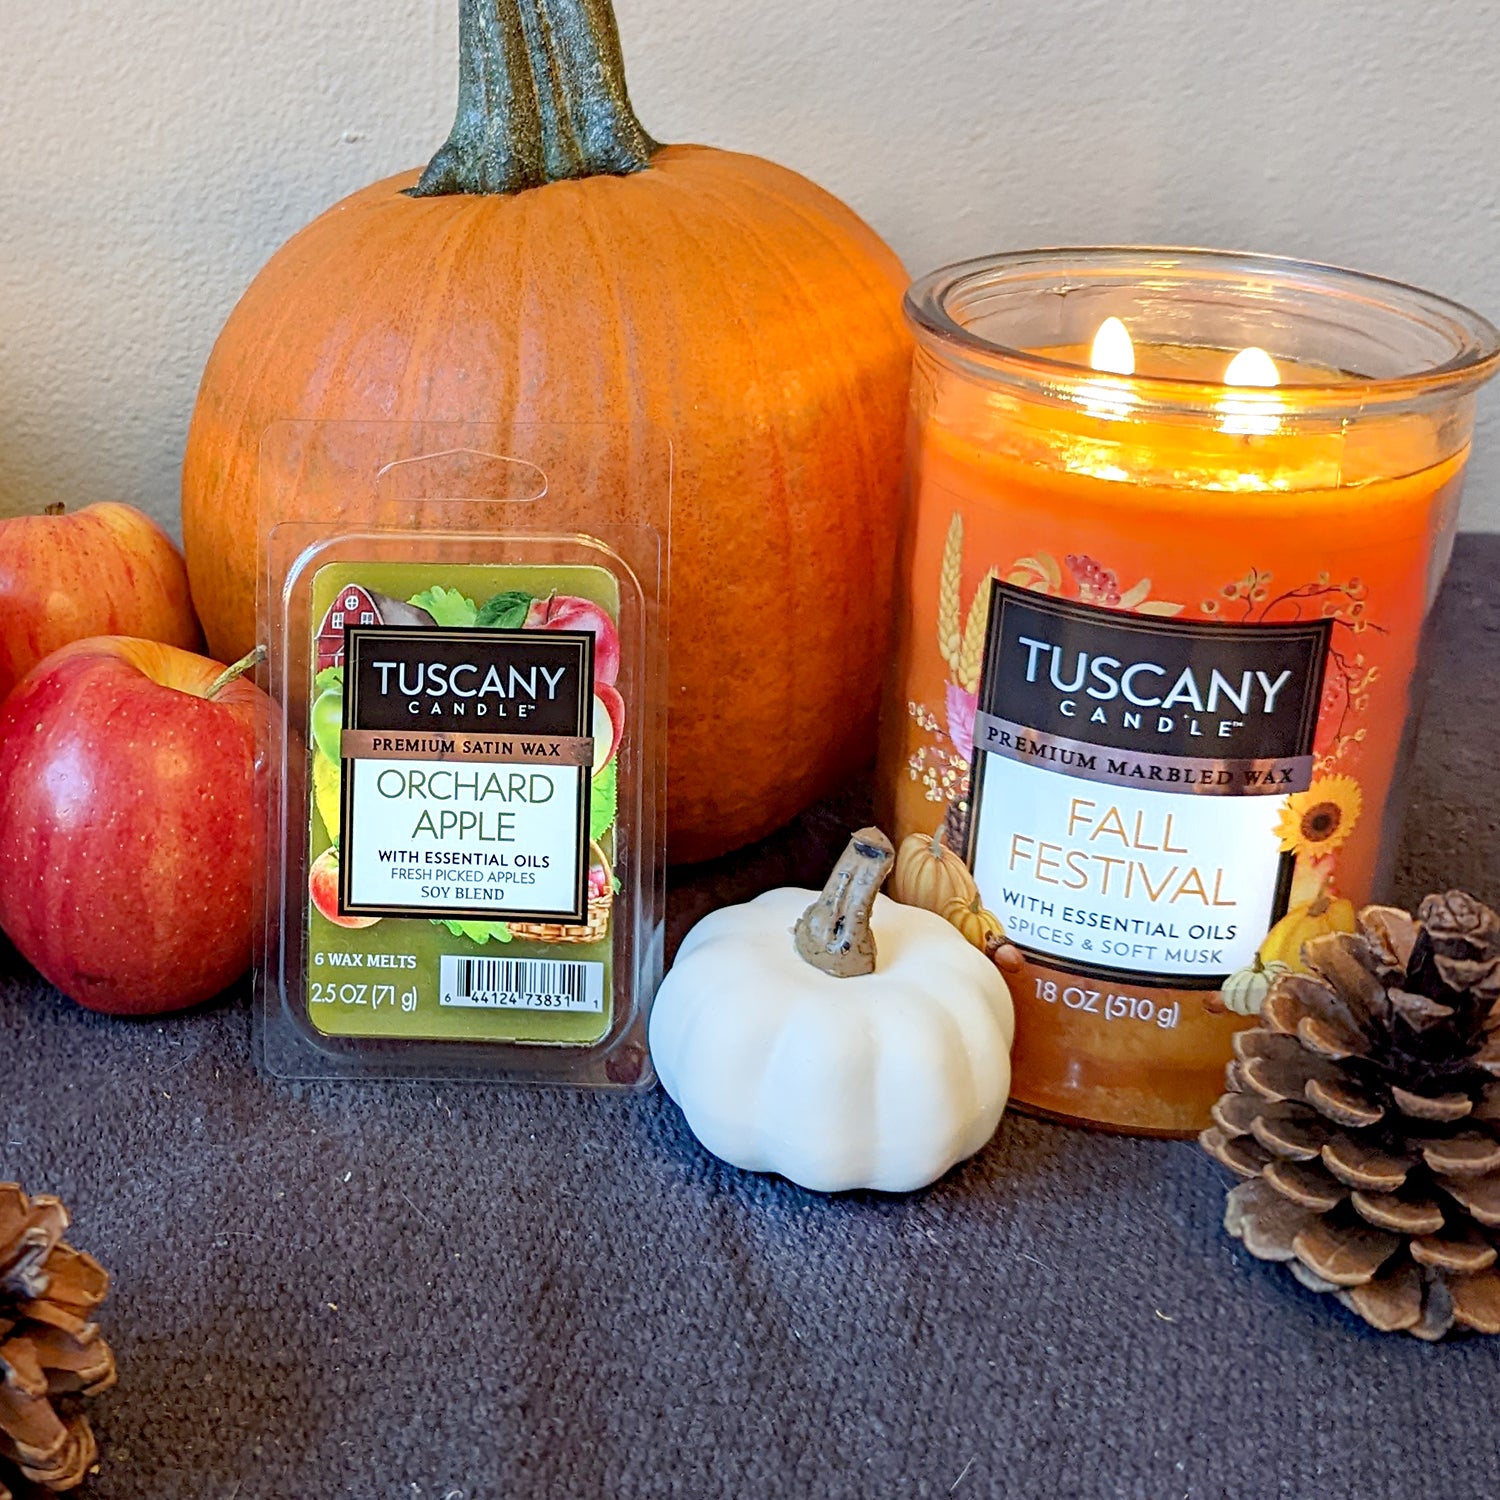 Fall inspired scented candles and tart bars are shown in a still life with pumpkins and apples